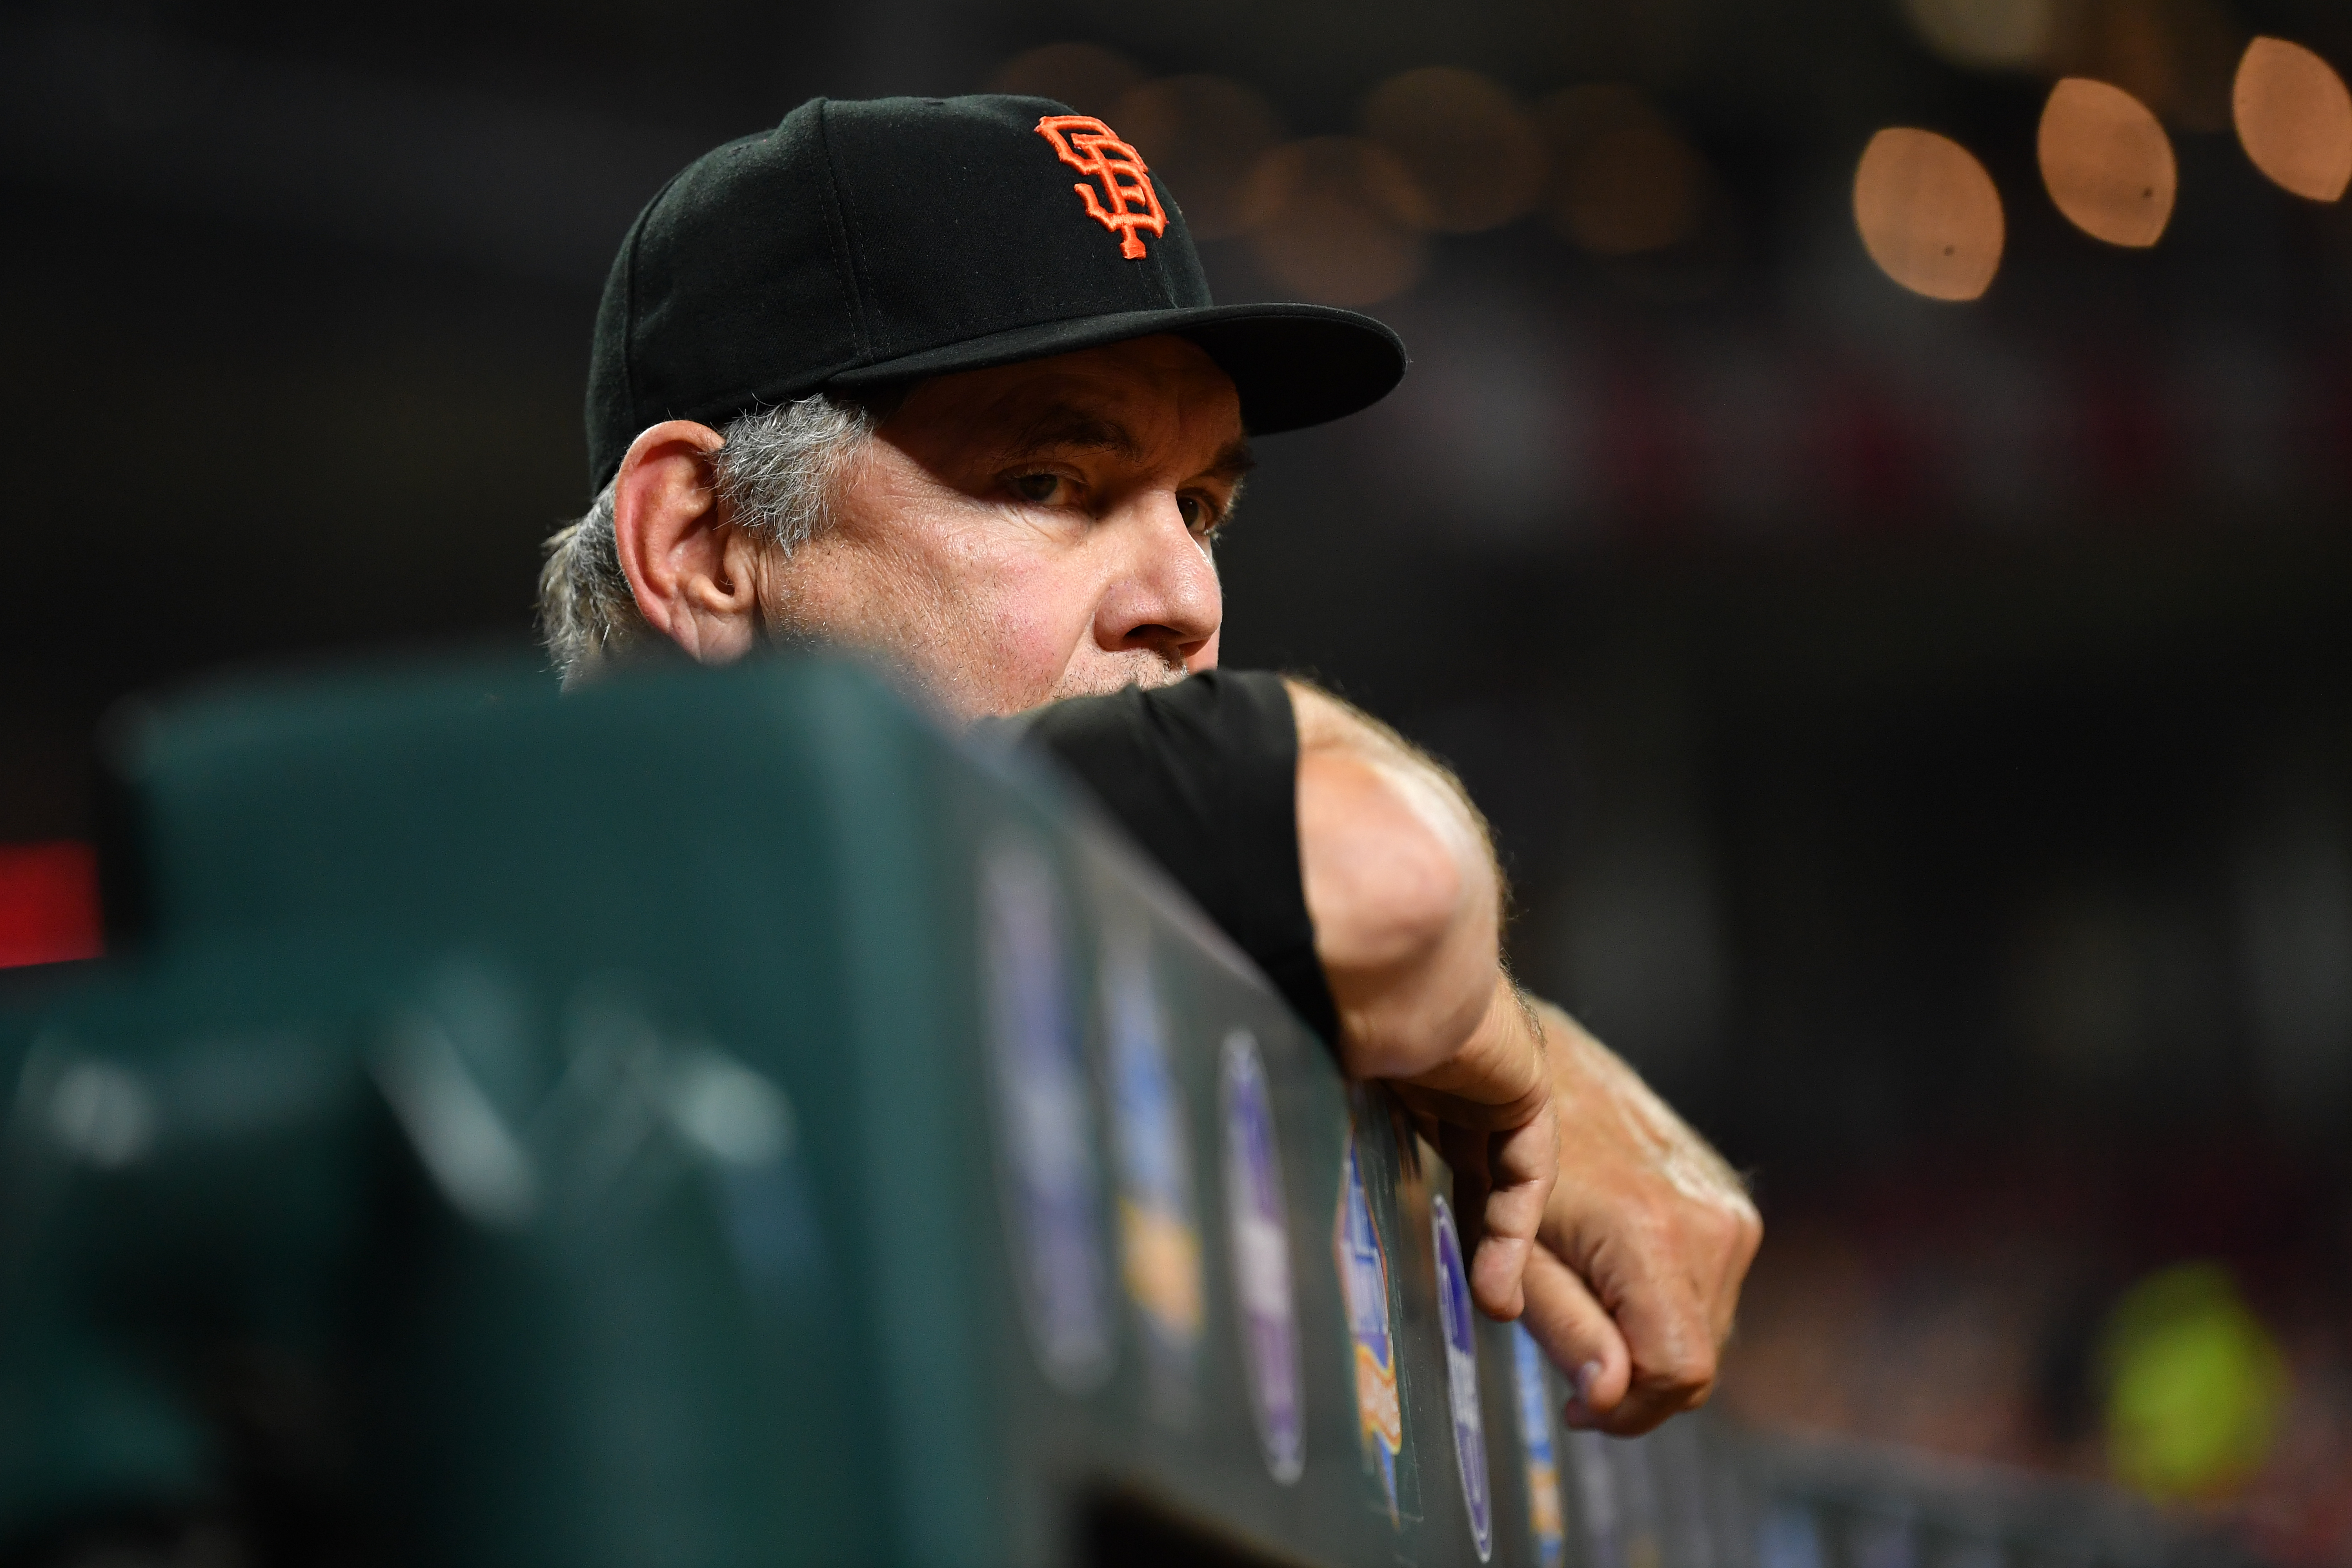 Giants manager Bochy to retire after 2019 season